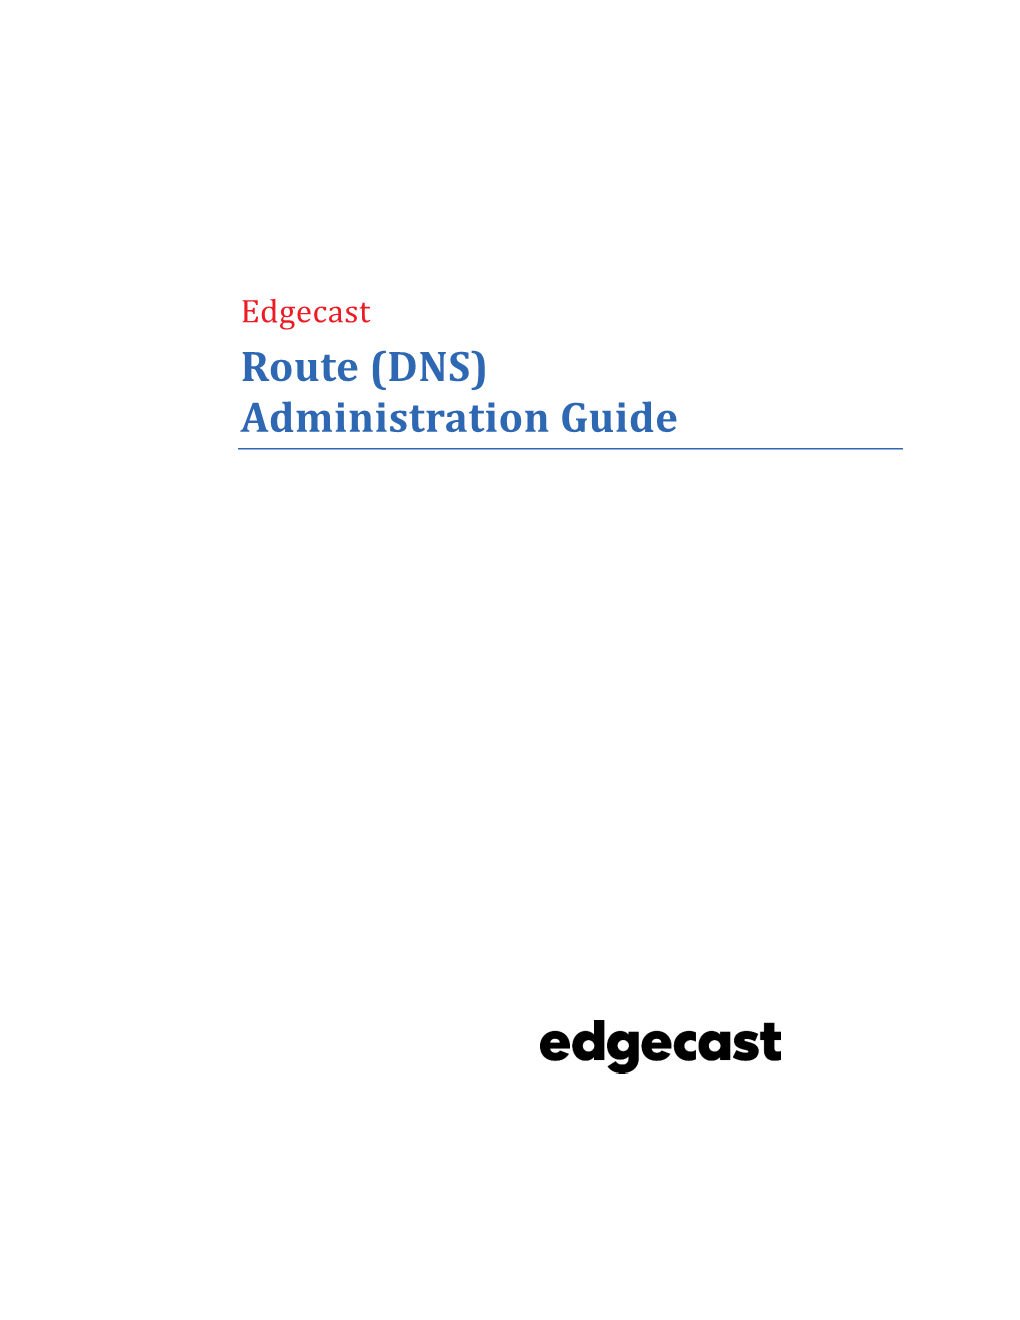 DNS) Administration Guide